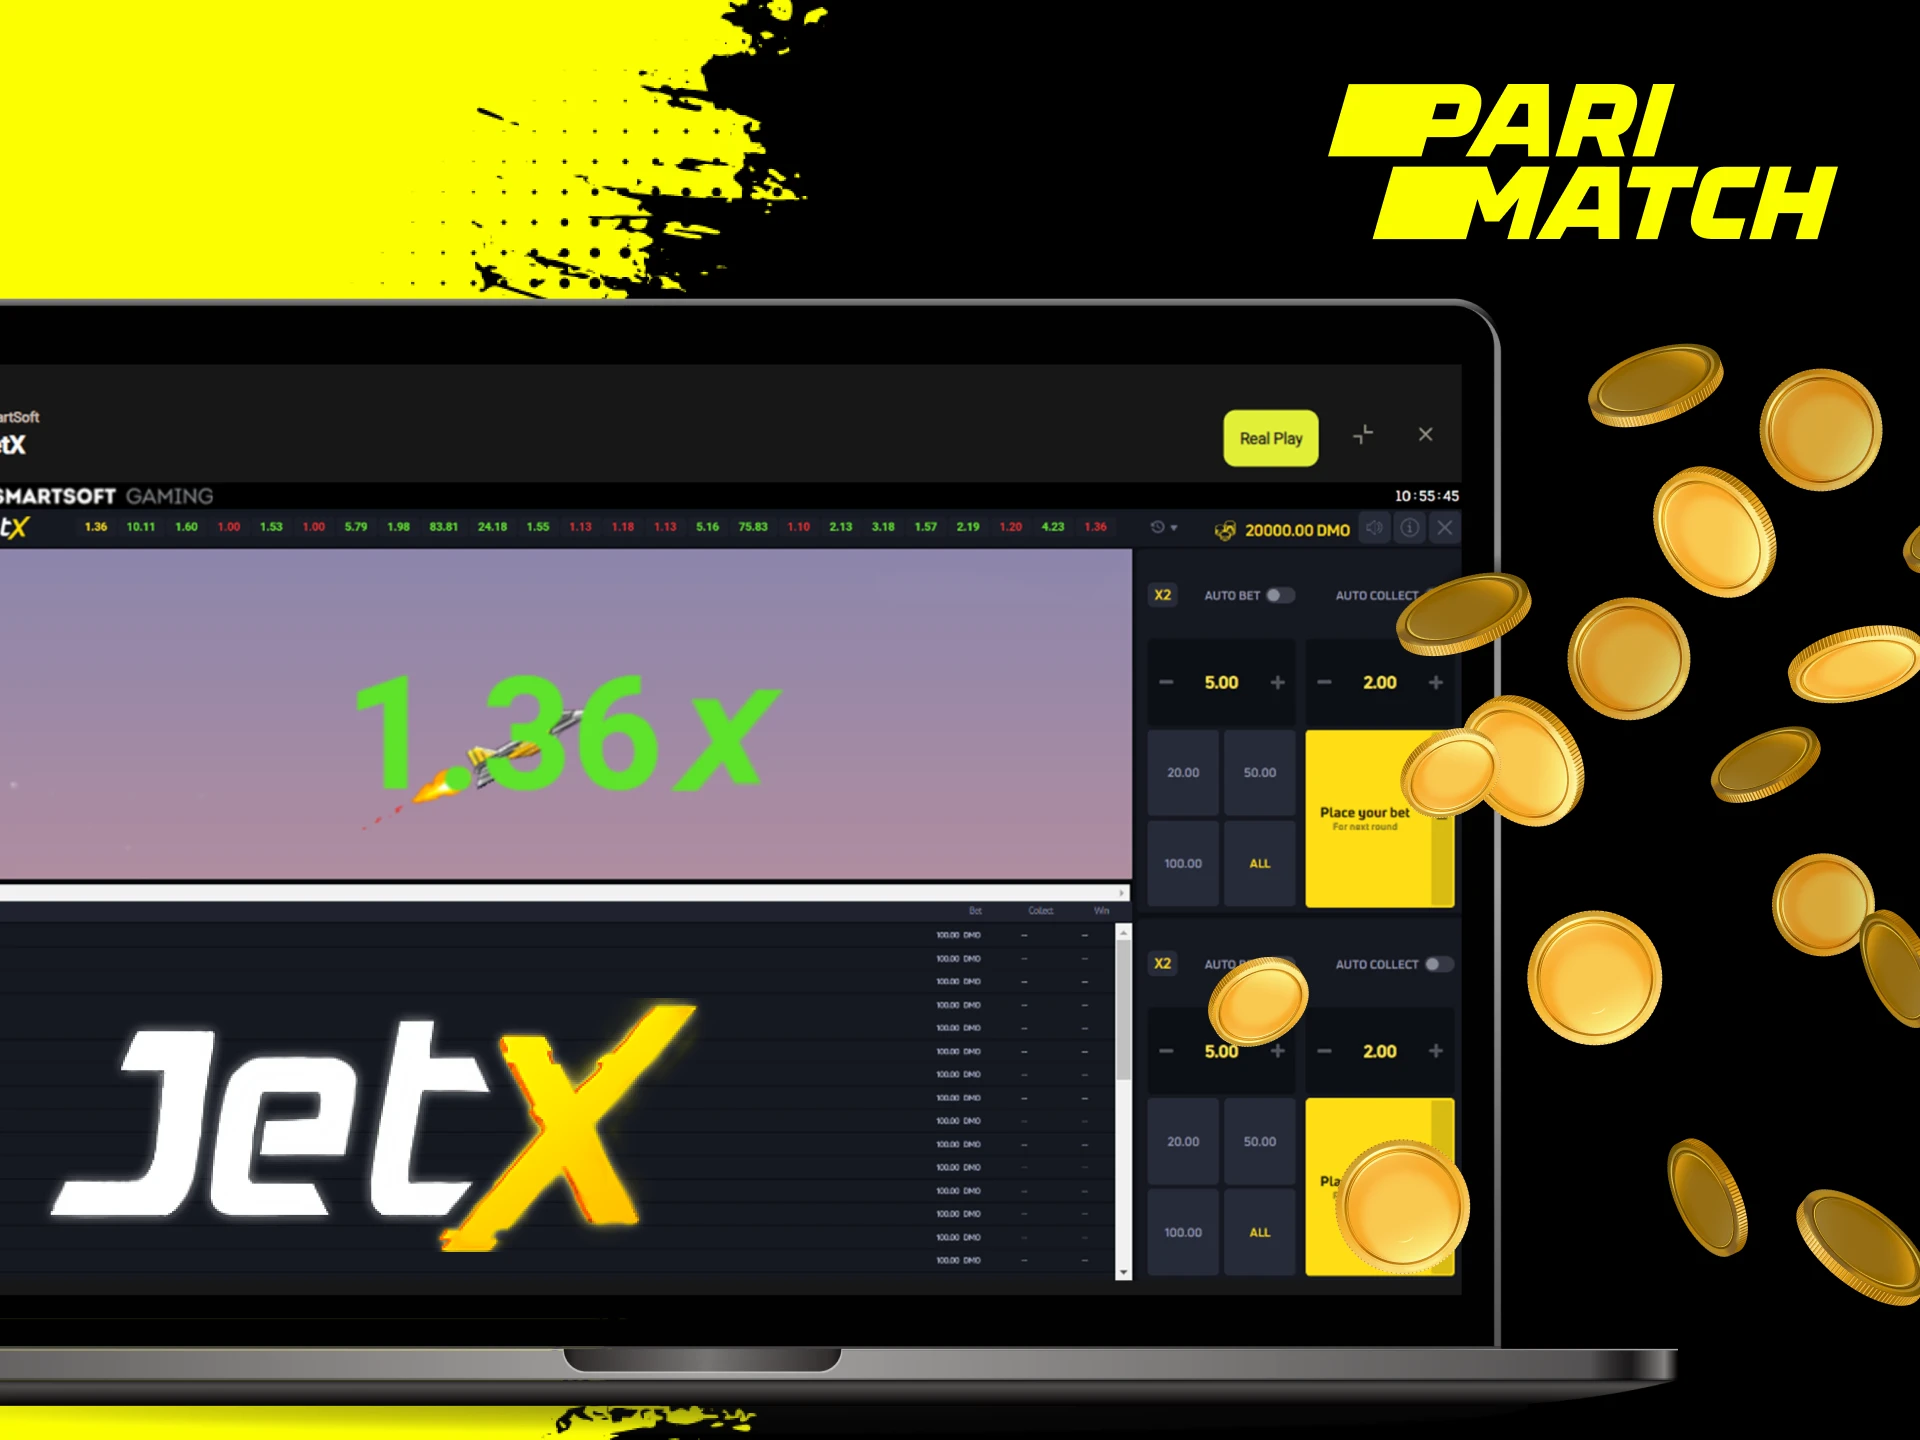 Why should I bet higher than I usually do and withdraw funds with low multipliers in the JetX game on the Parimatch online casino website.